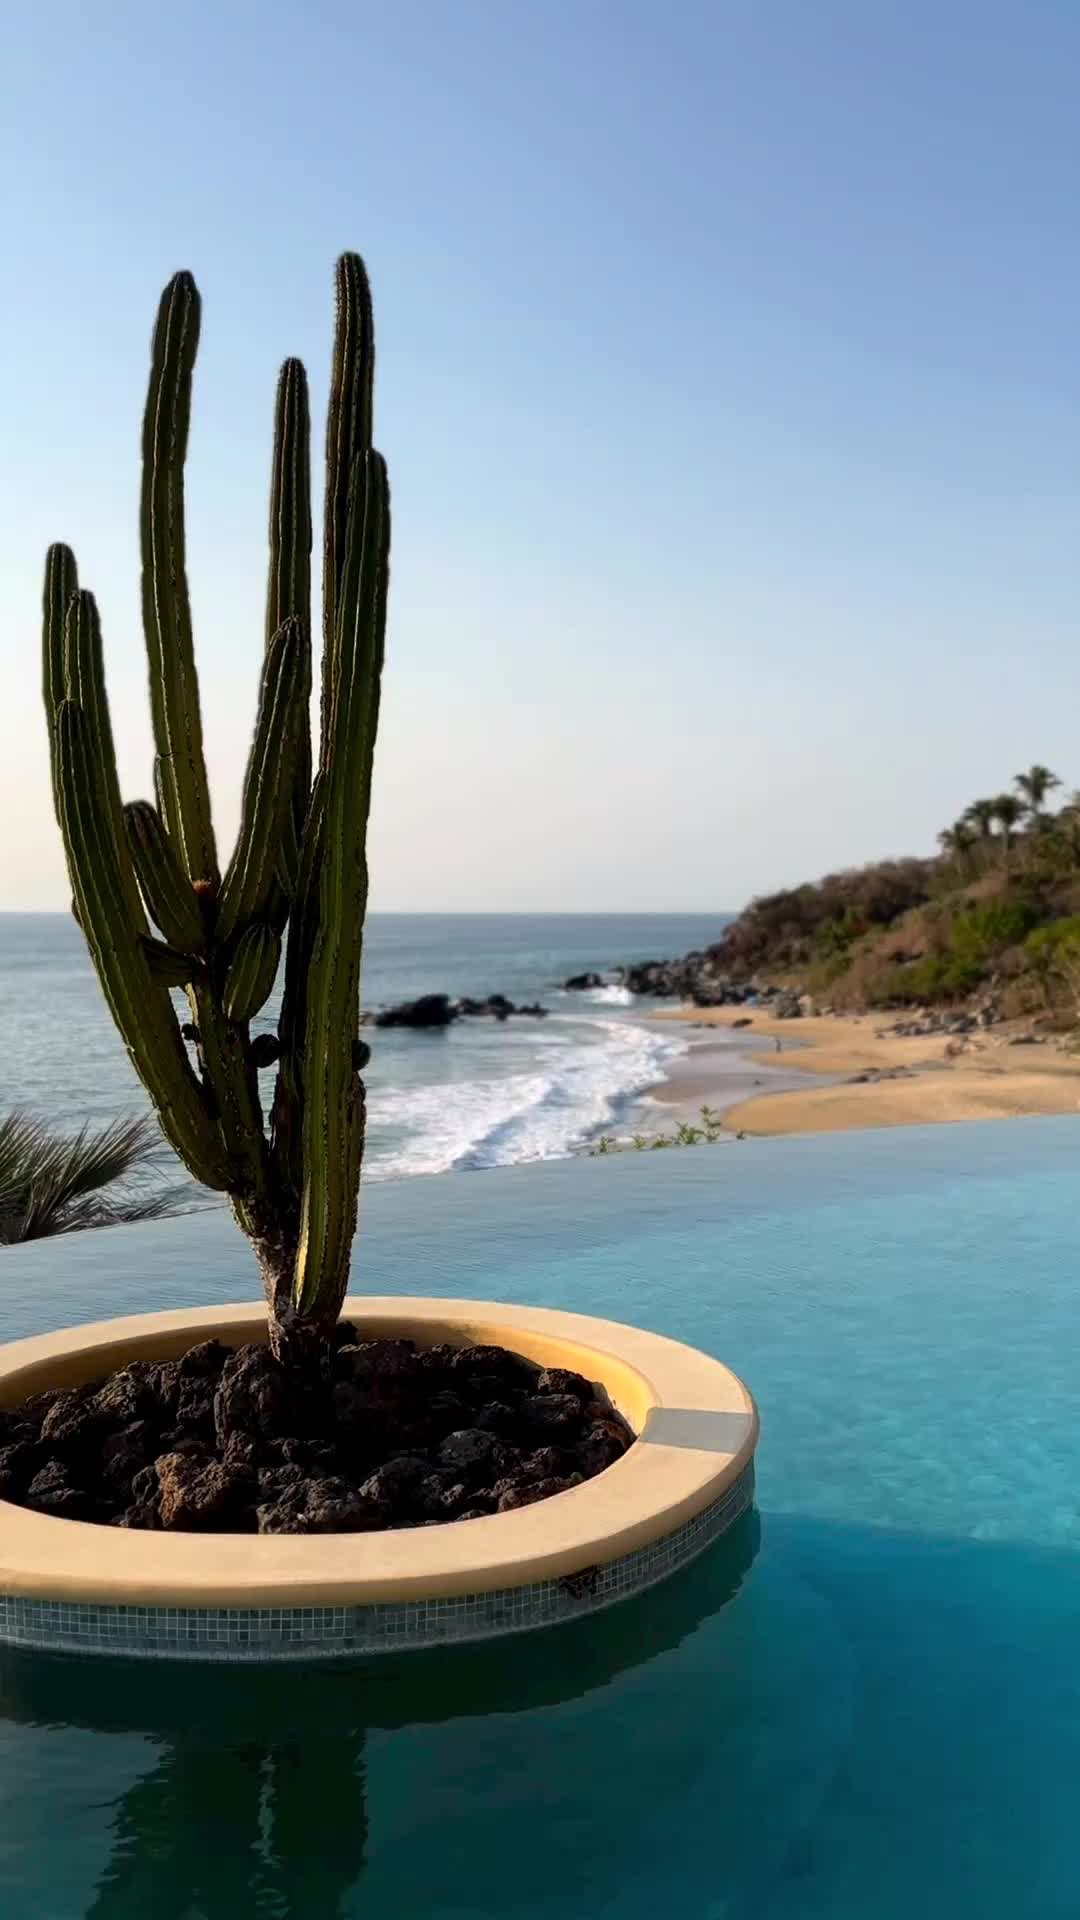 Discover the Surfer-Chill Vibes of Sayulita, Mexico